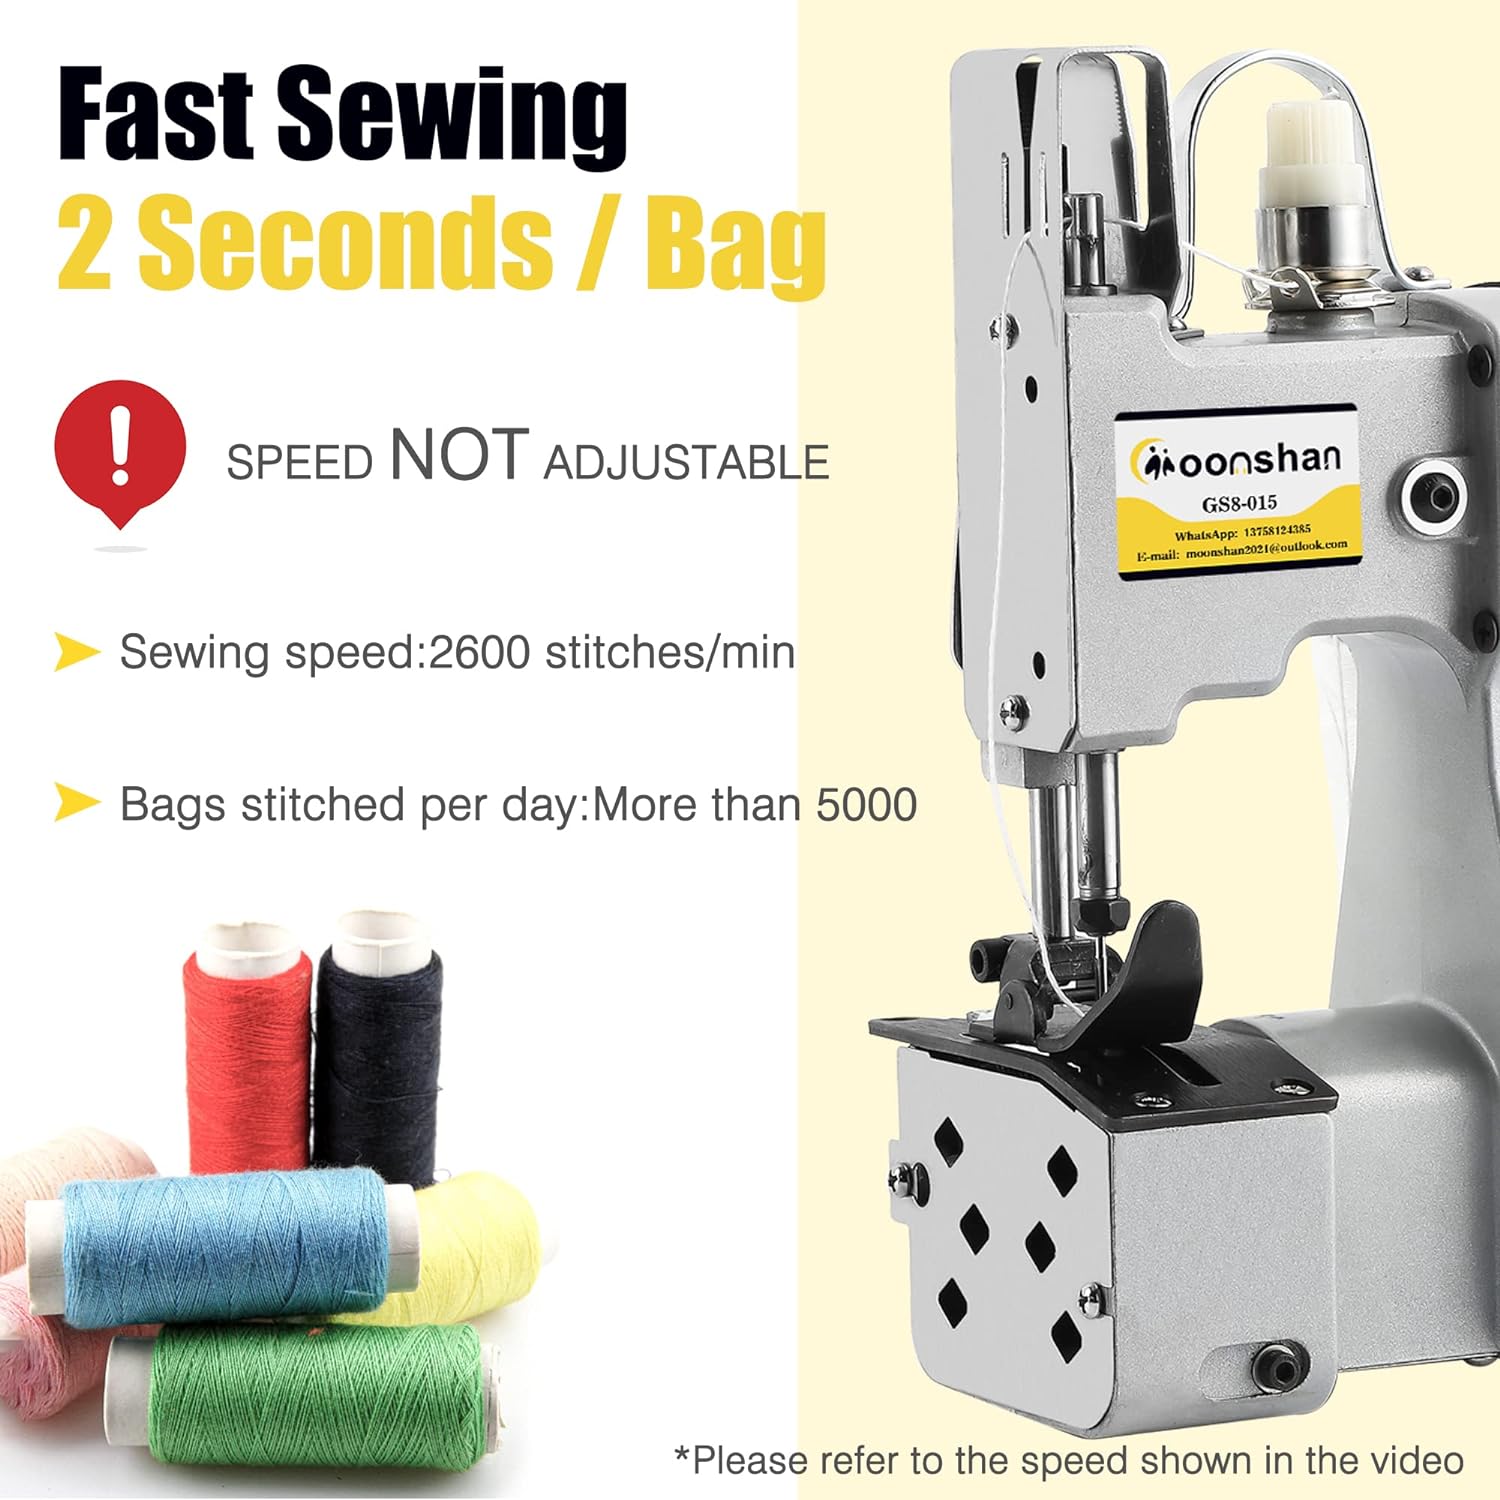 Moonshan Bag Sewing Machine 2s/bag for Packing Bags Non-woven Fabrics ·  DISCOUNT BROS